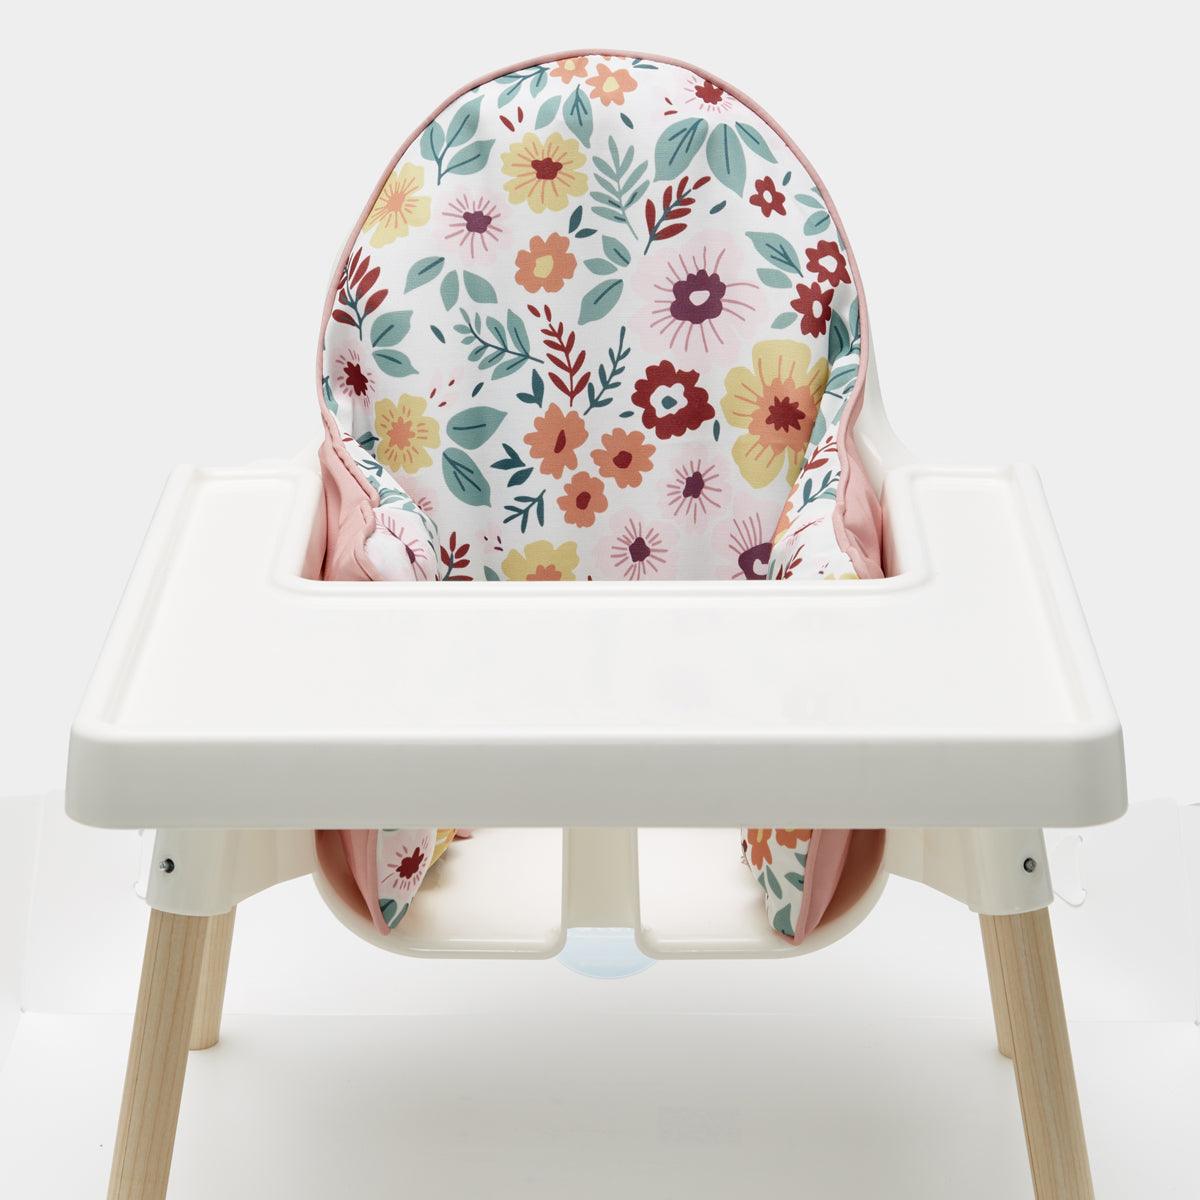 Cushion cover for IKEA Antilop & similar high chairs - Catchy